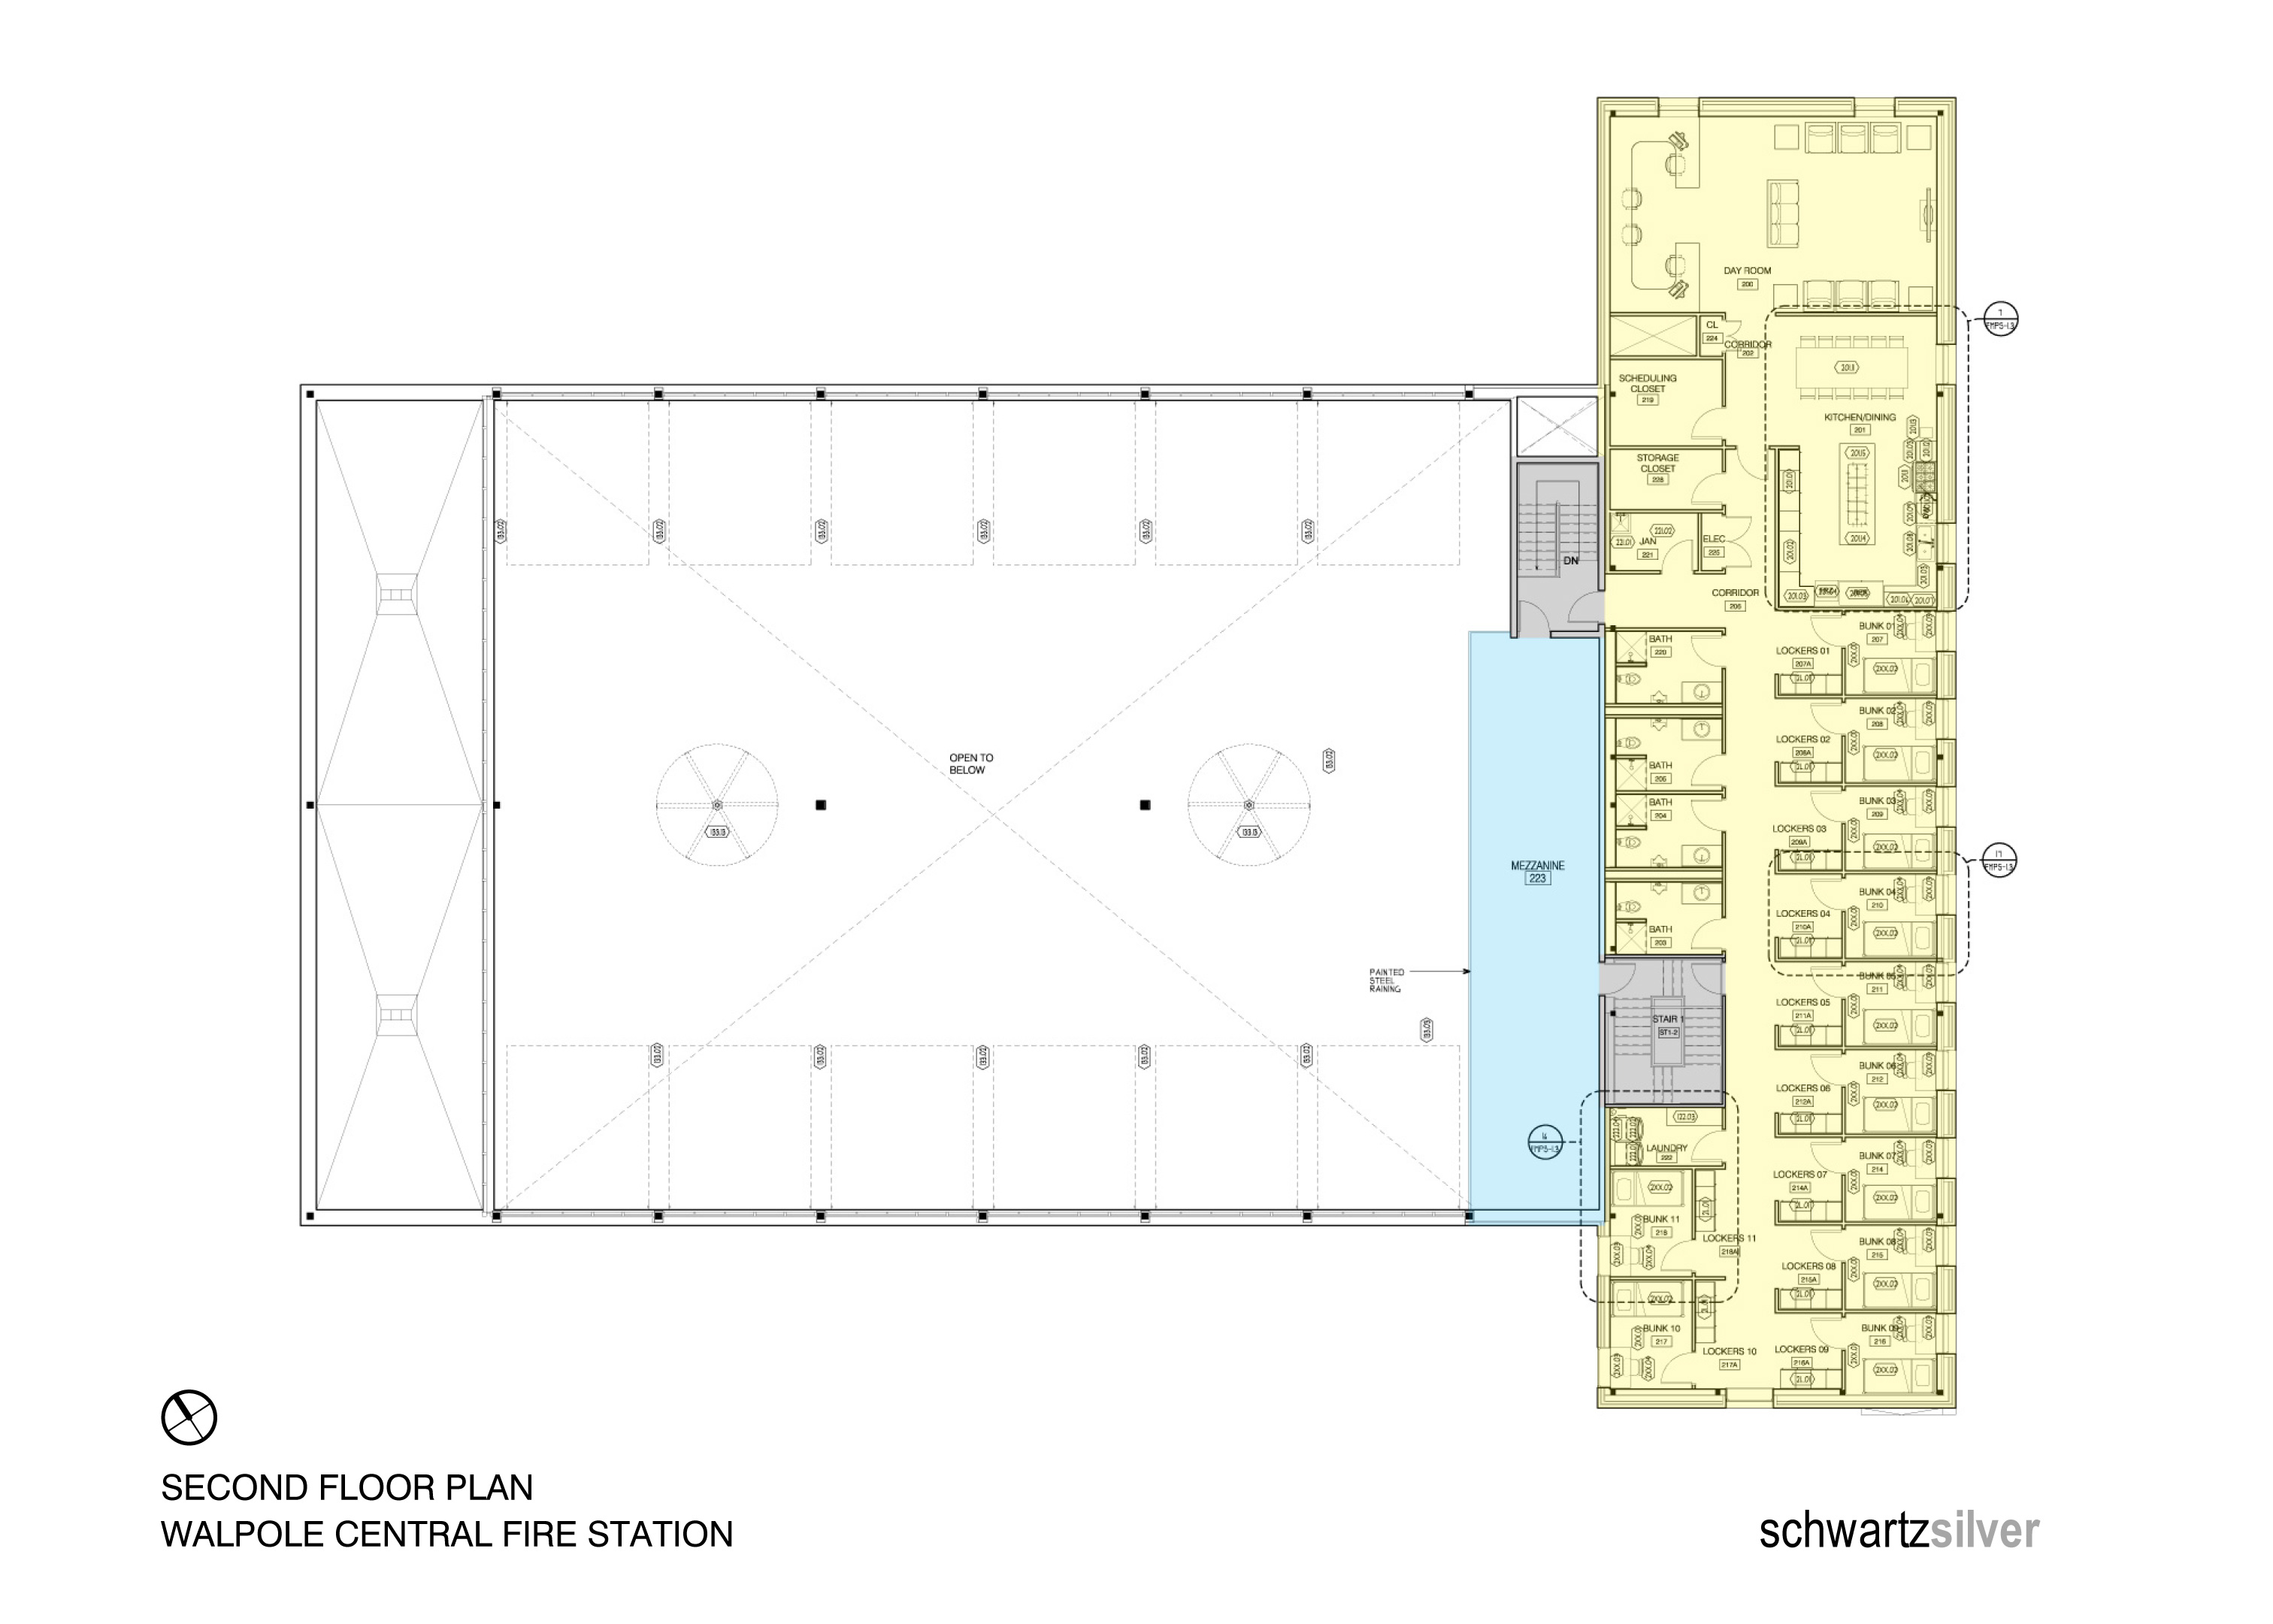 What are some common fire station floor plans?